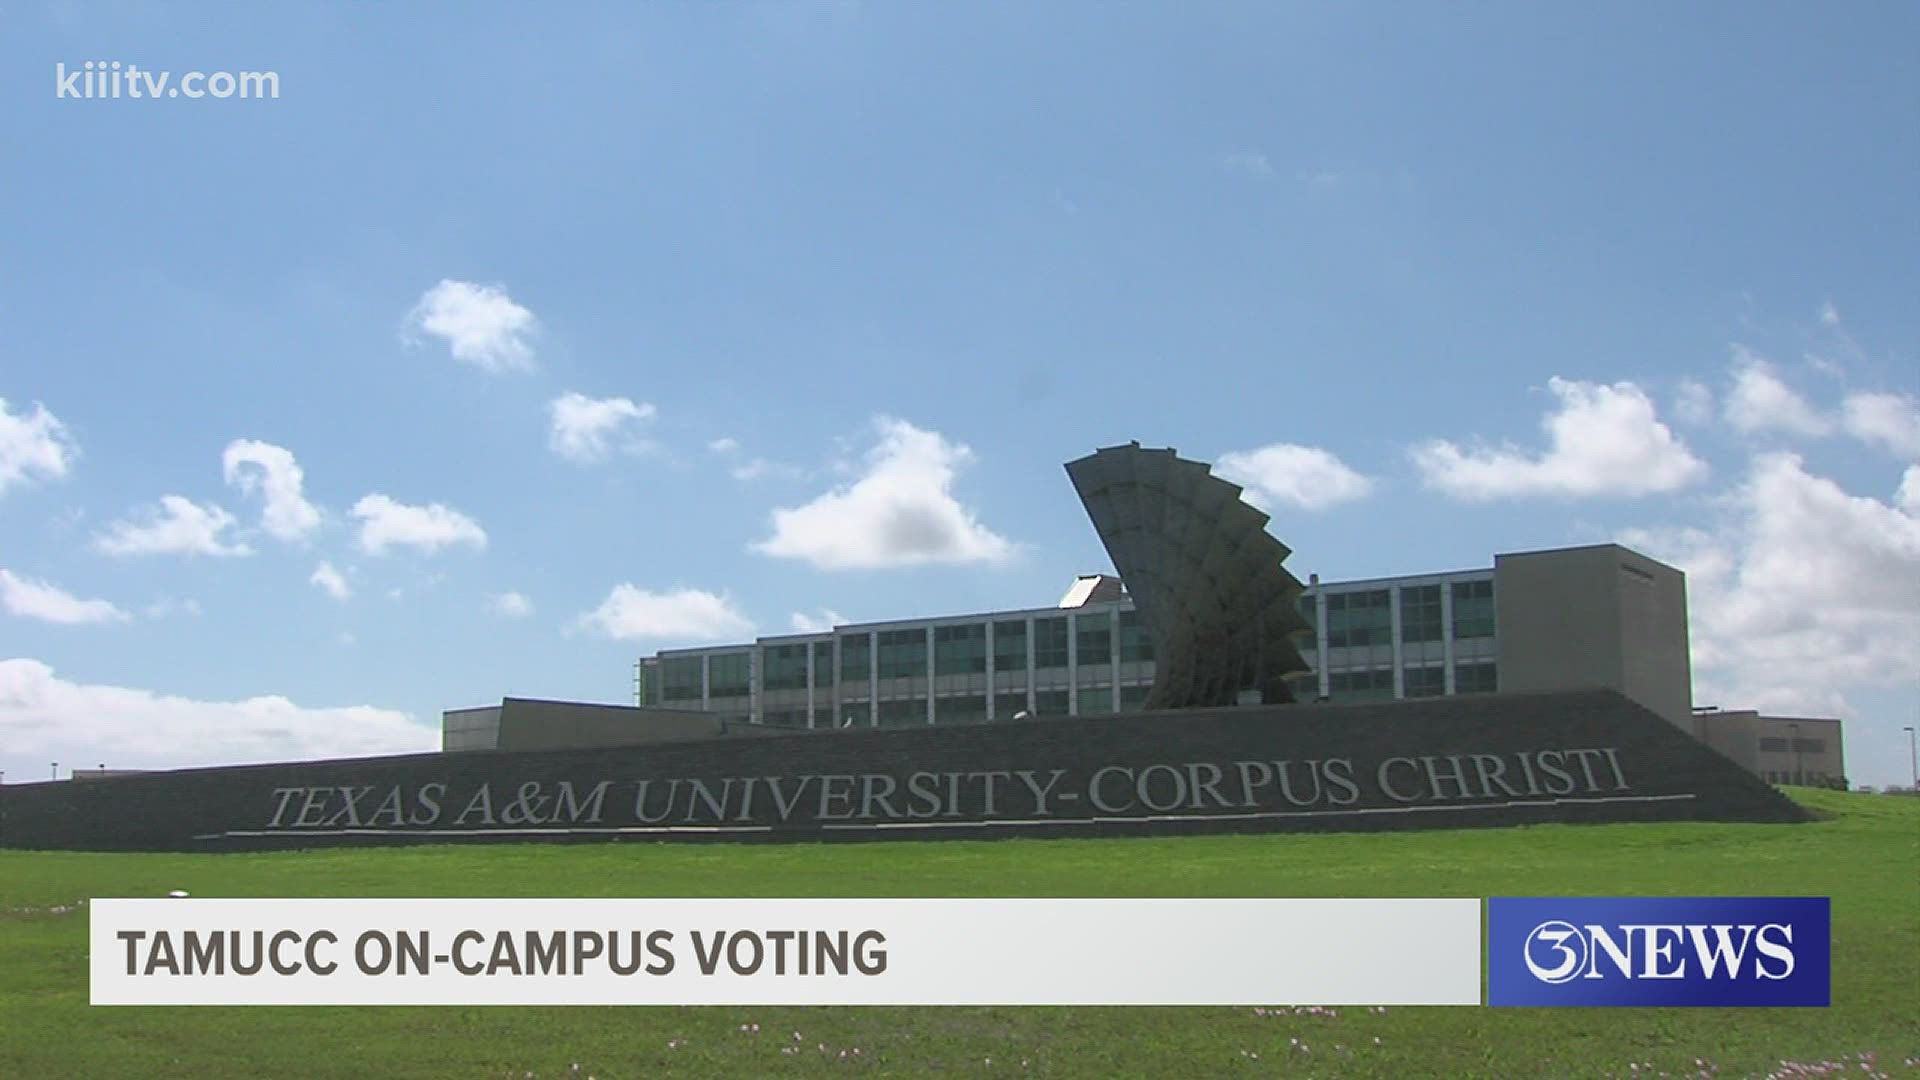 In just the first few days of early voting, the polling site on the Texas A&M University - Corpus Christi campus counted 1,068 voters.